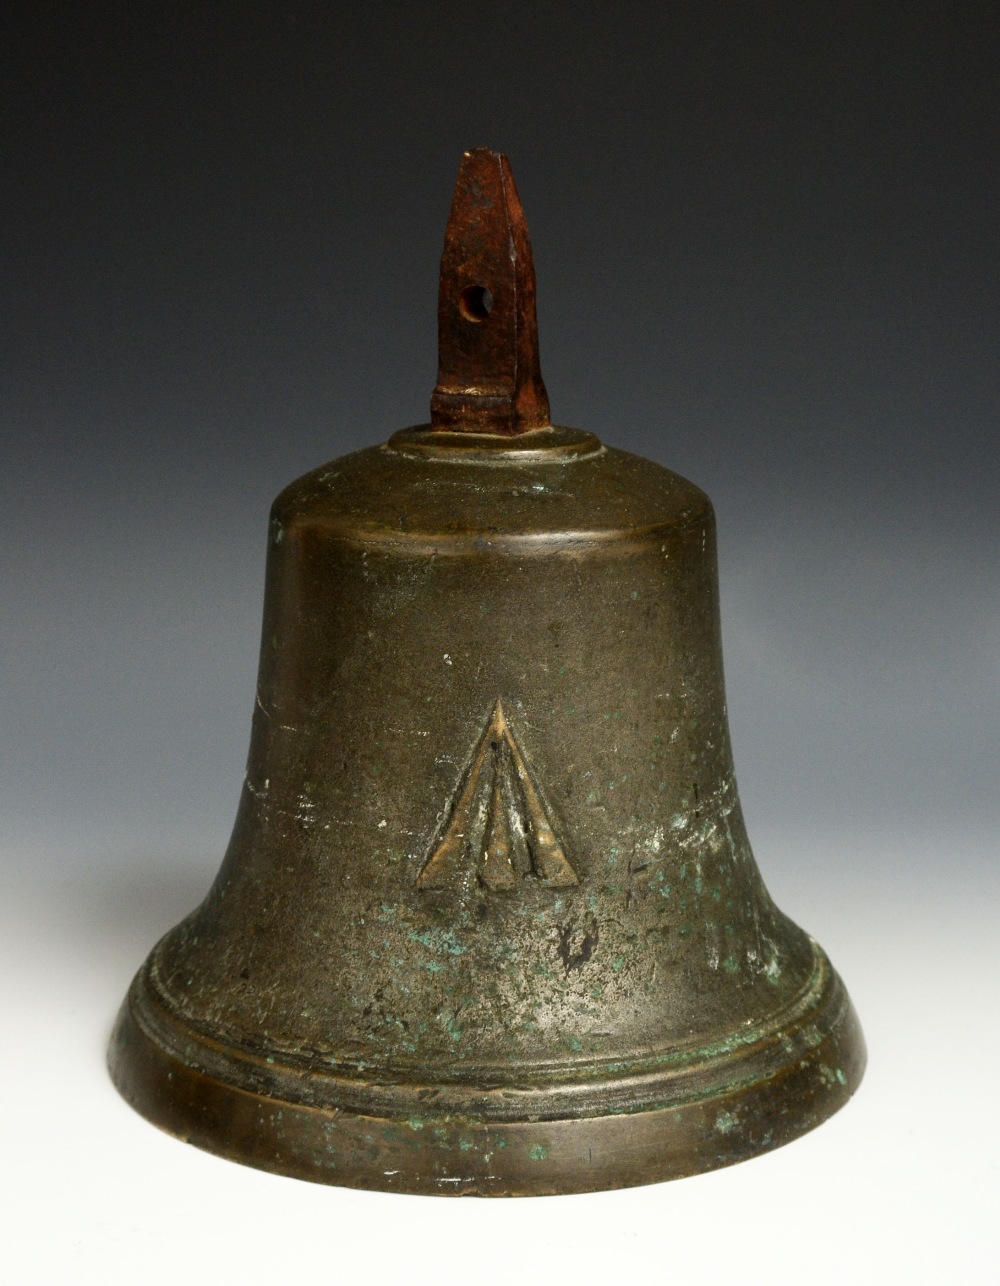 A 19th century bronze military bell, possibly from a ship, iron tang, cast broad arrow mark, 21cm